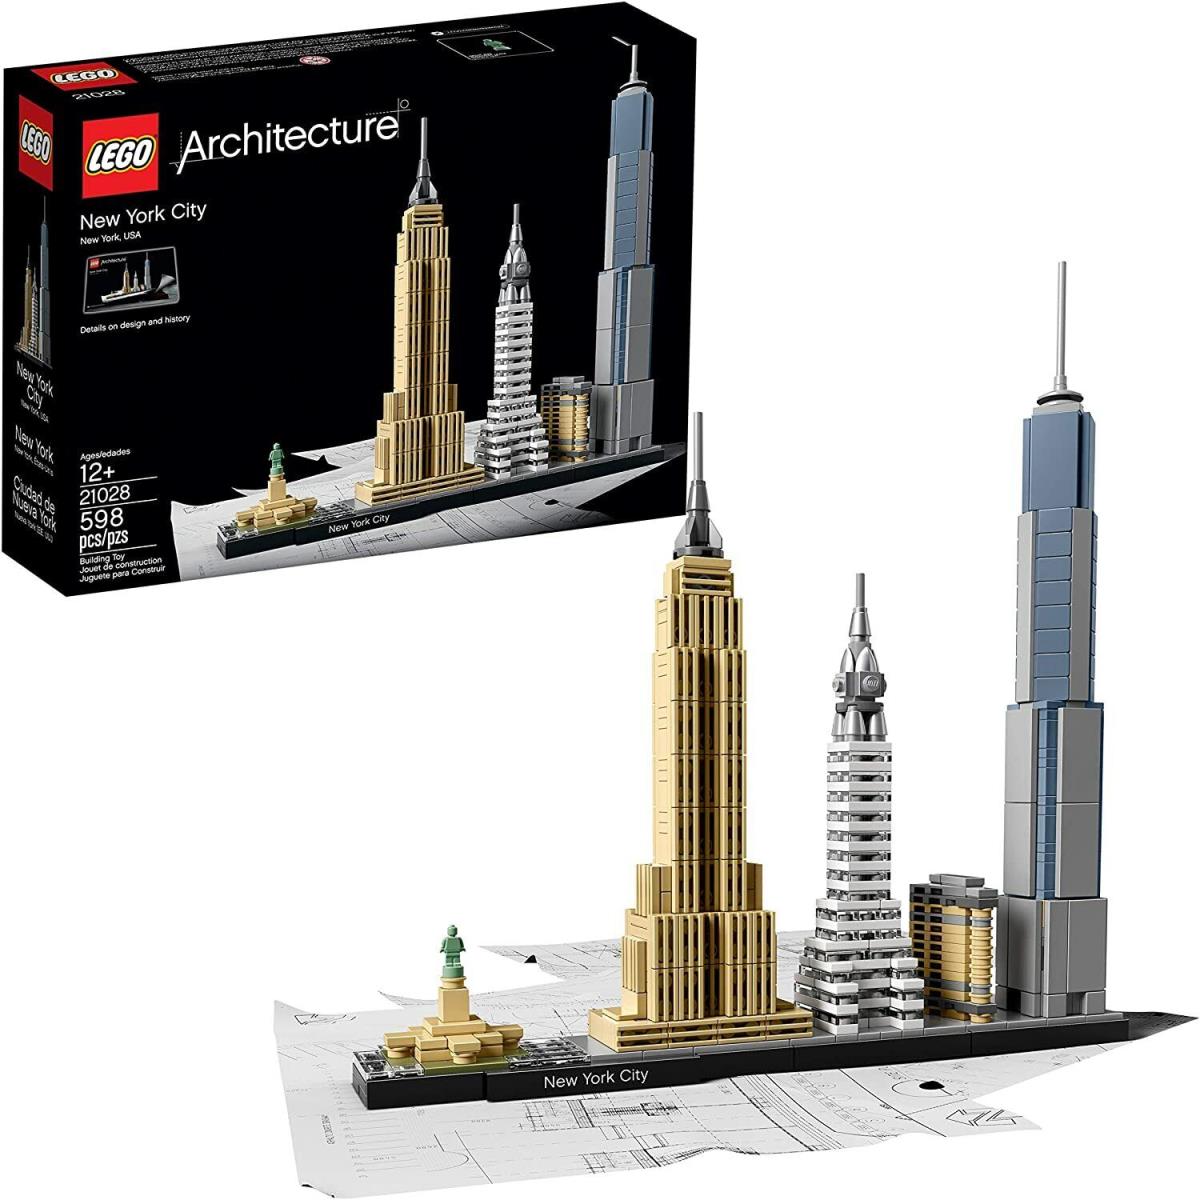 Lego Architecture 21028 York City 598 Pieces in Retail Box